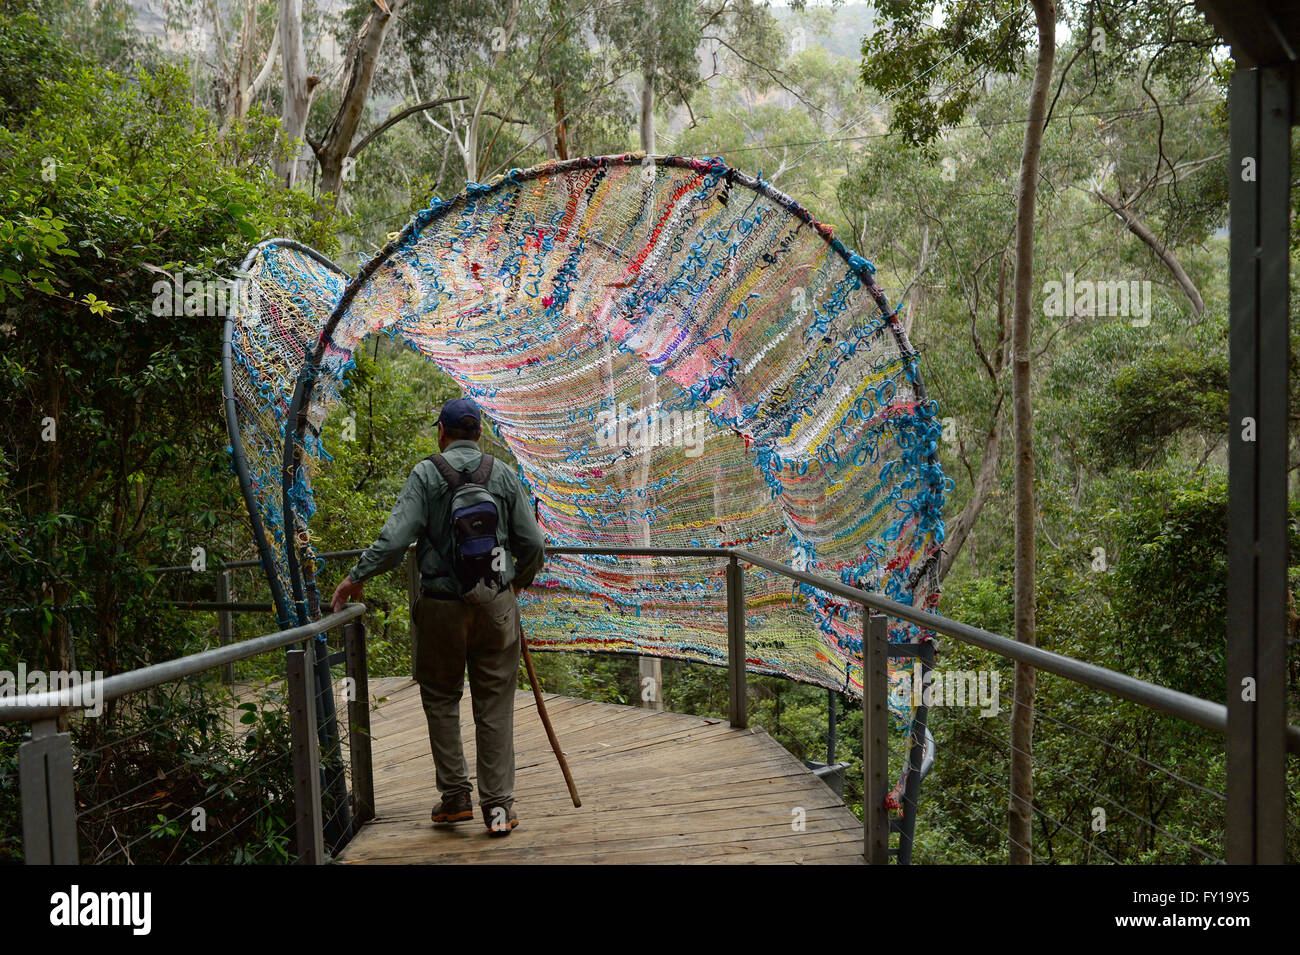 An artwork titled «Tunnel of Love» by Australian artist Kevina Jo-Smith at the Sculpture at the Scenic World exhibition in a rainforest in Australia, April 7, 2016. It is one of the 28 sculptures being exhibited at the Scenic World, a privately-owned tourist attraction, in the Blue Mountains region, some 100 kilometers west of Sydney. Photo: SUBEL BHANDARI/dpa Stock Photo